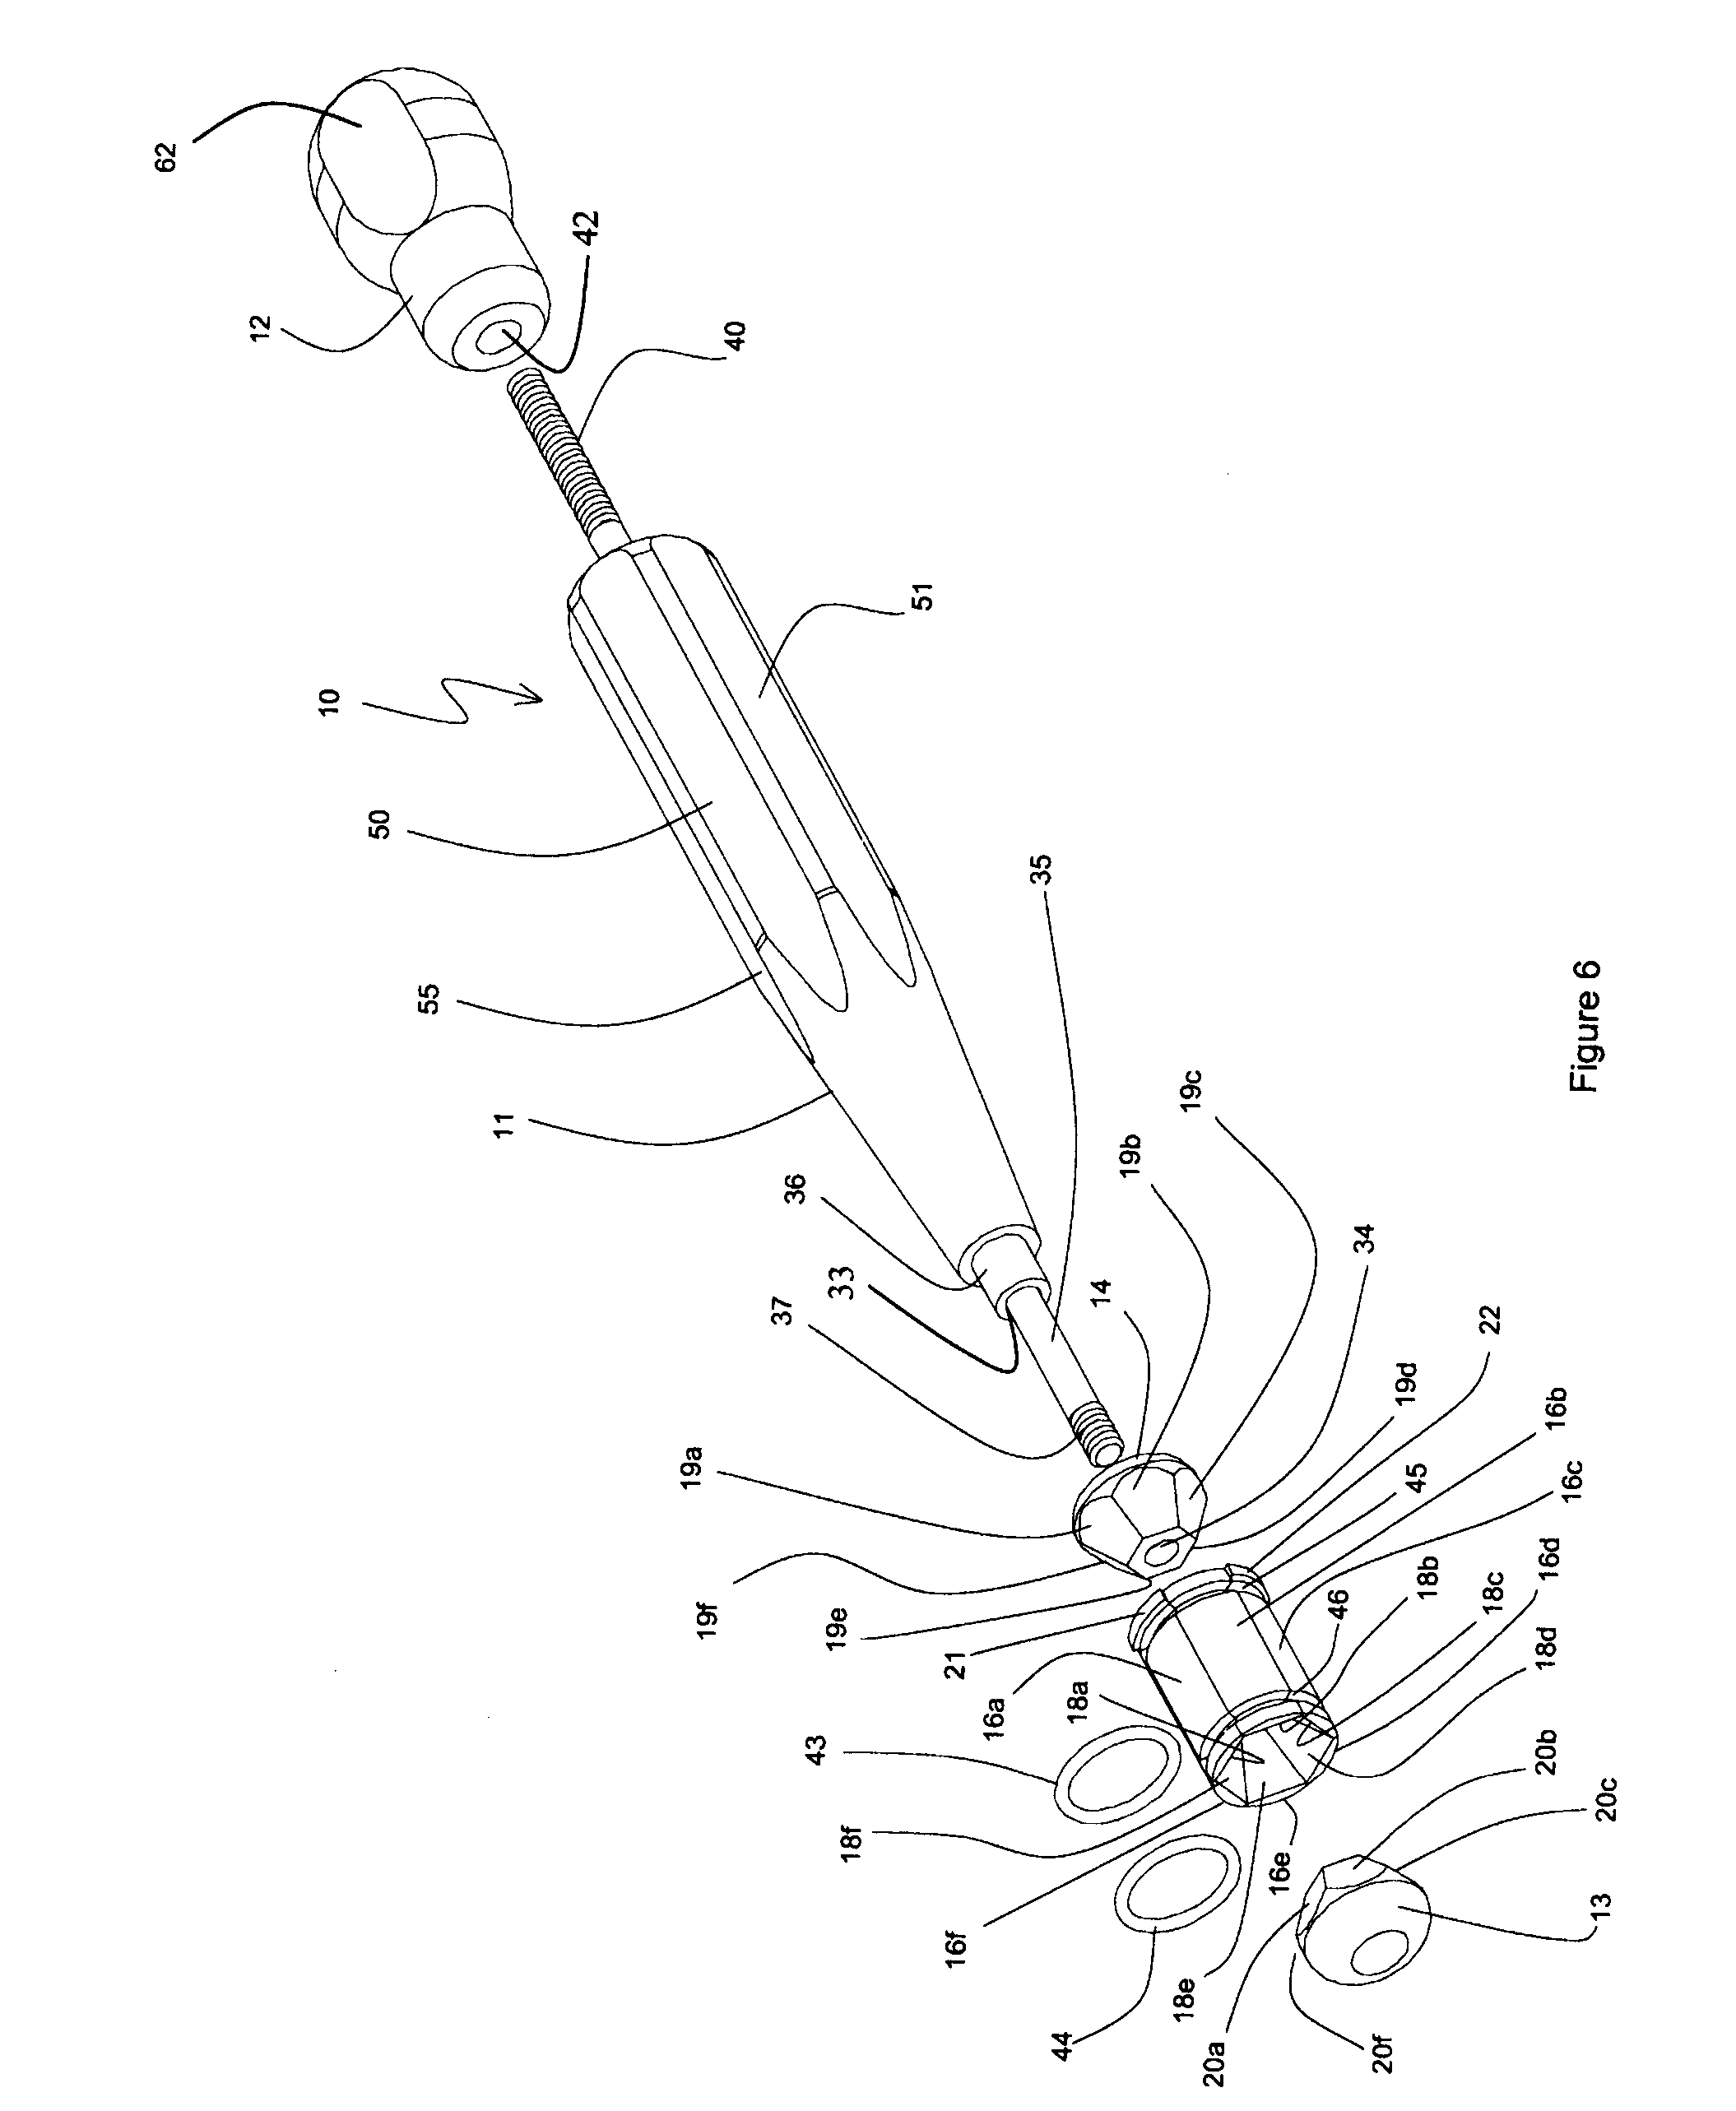 Method and Devices For Cardiac Valve Annulus Expansion